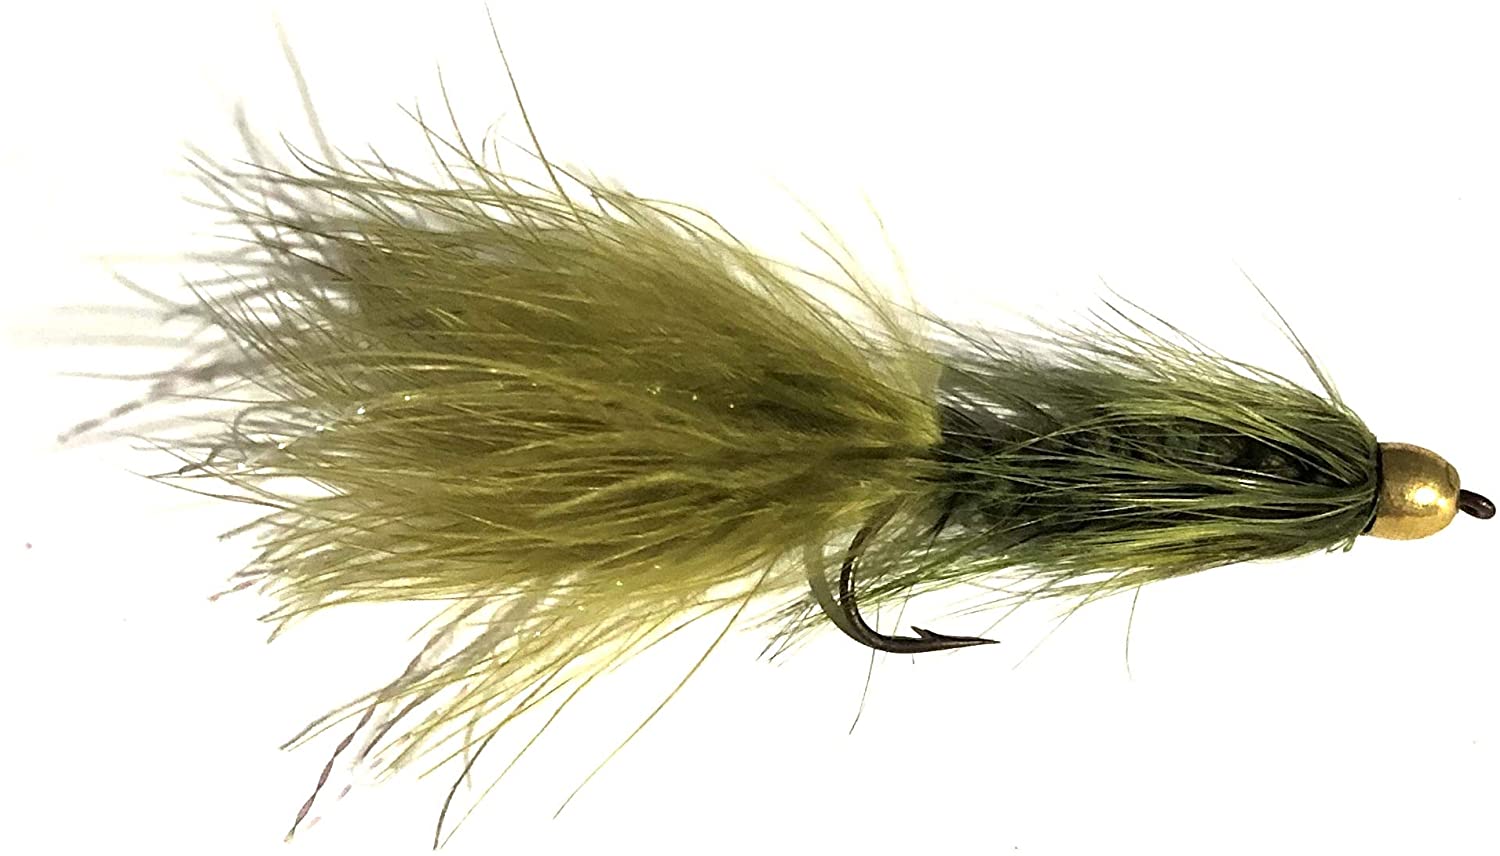 Conehead Wooly Bugger Fly Fishing Flies for Trout and Other Freshwater Fish  - One Dozen Wet / Streamer Flies (Black, 8)